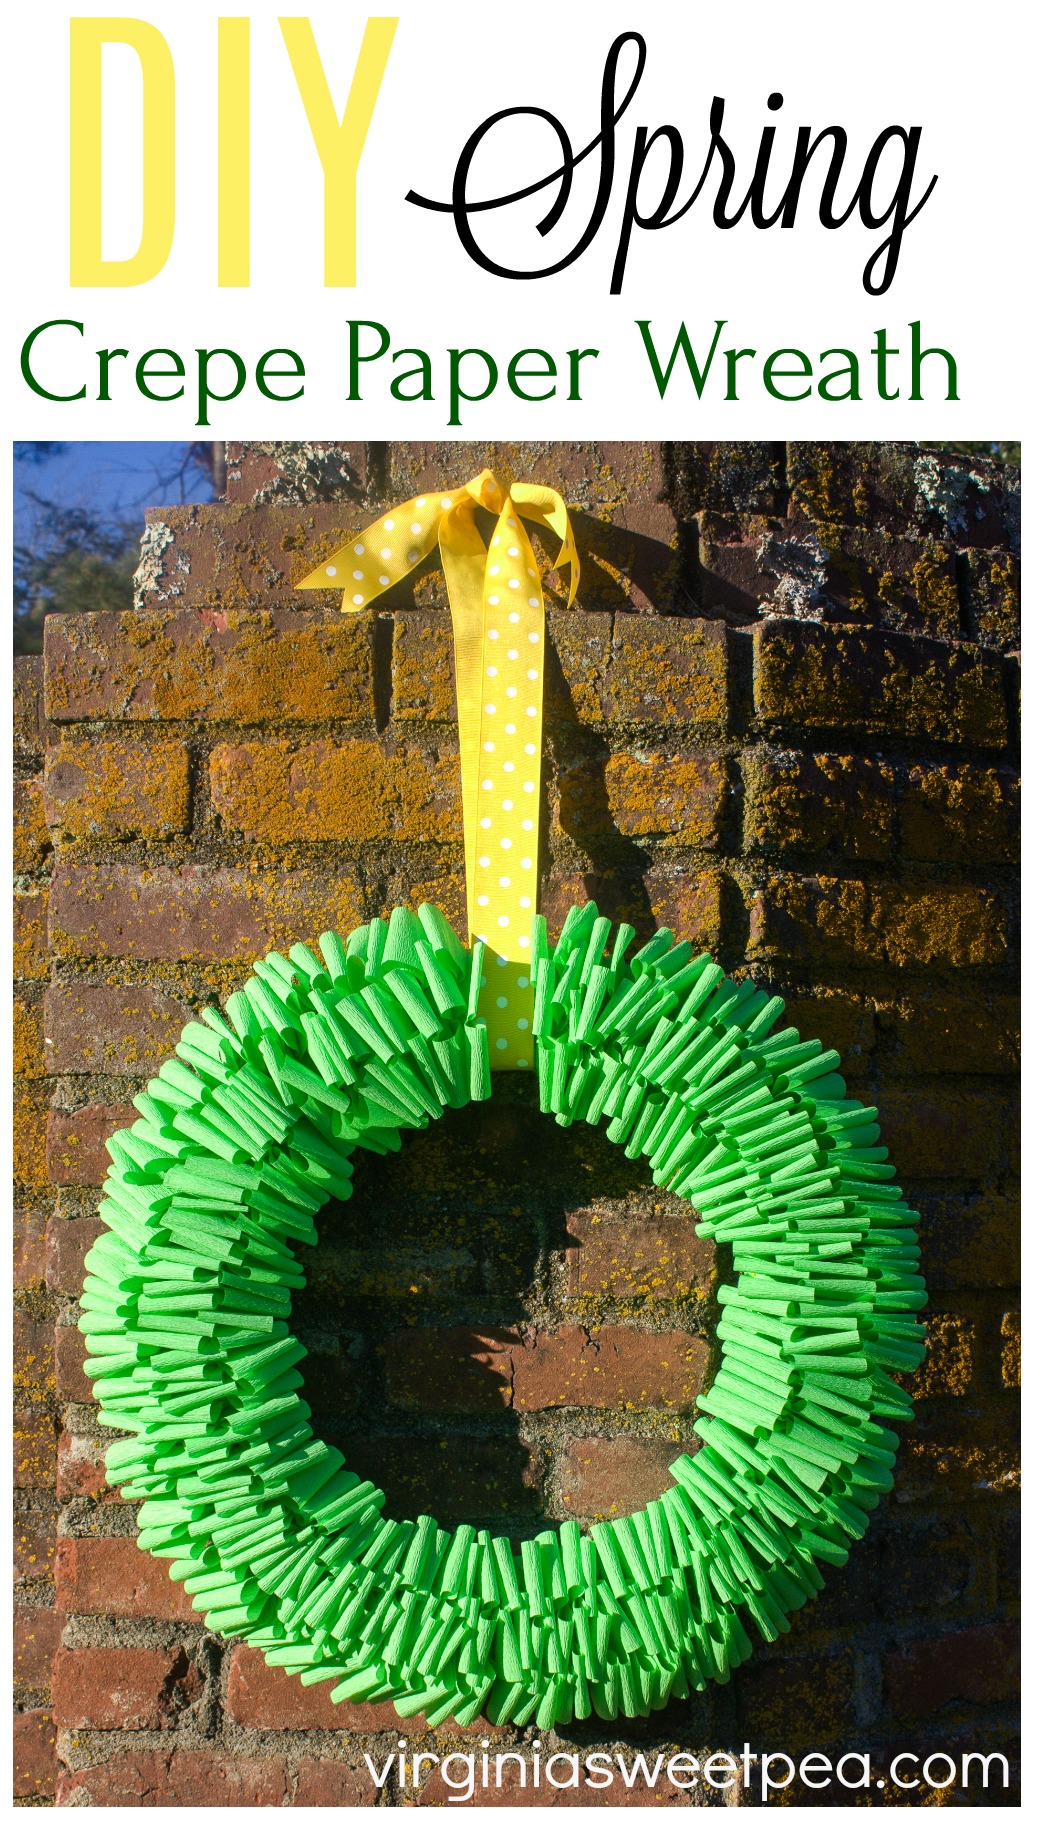 DIY Spring Crepe Paper Wreath - Learn how to make a crepe paper wreath for spring. Customize the look with your choice of crepe paper and ribbon colors. #wreath #springwreath #springcraft #crepepaper #crepepapercraft